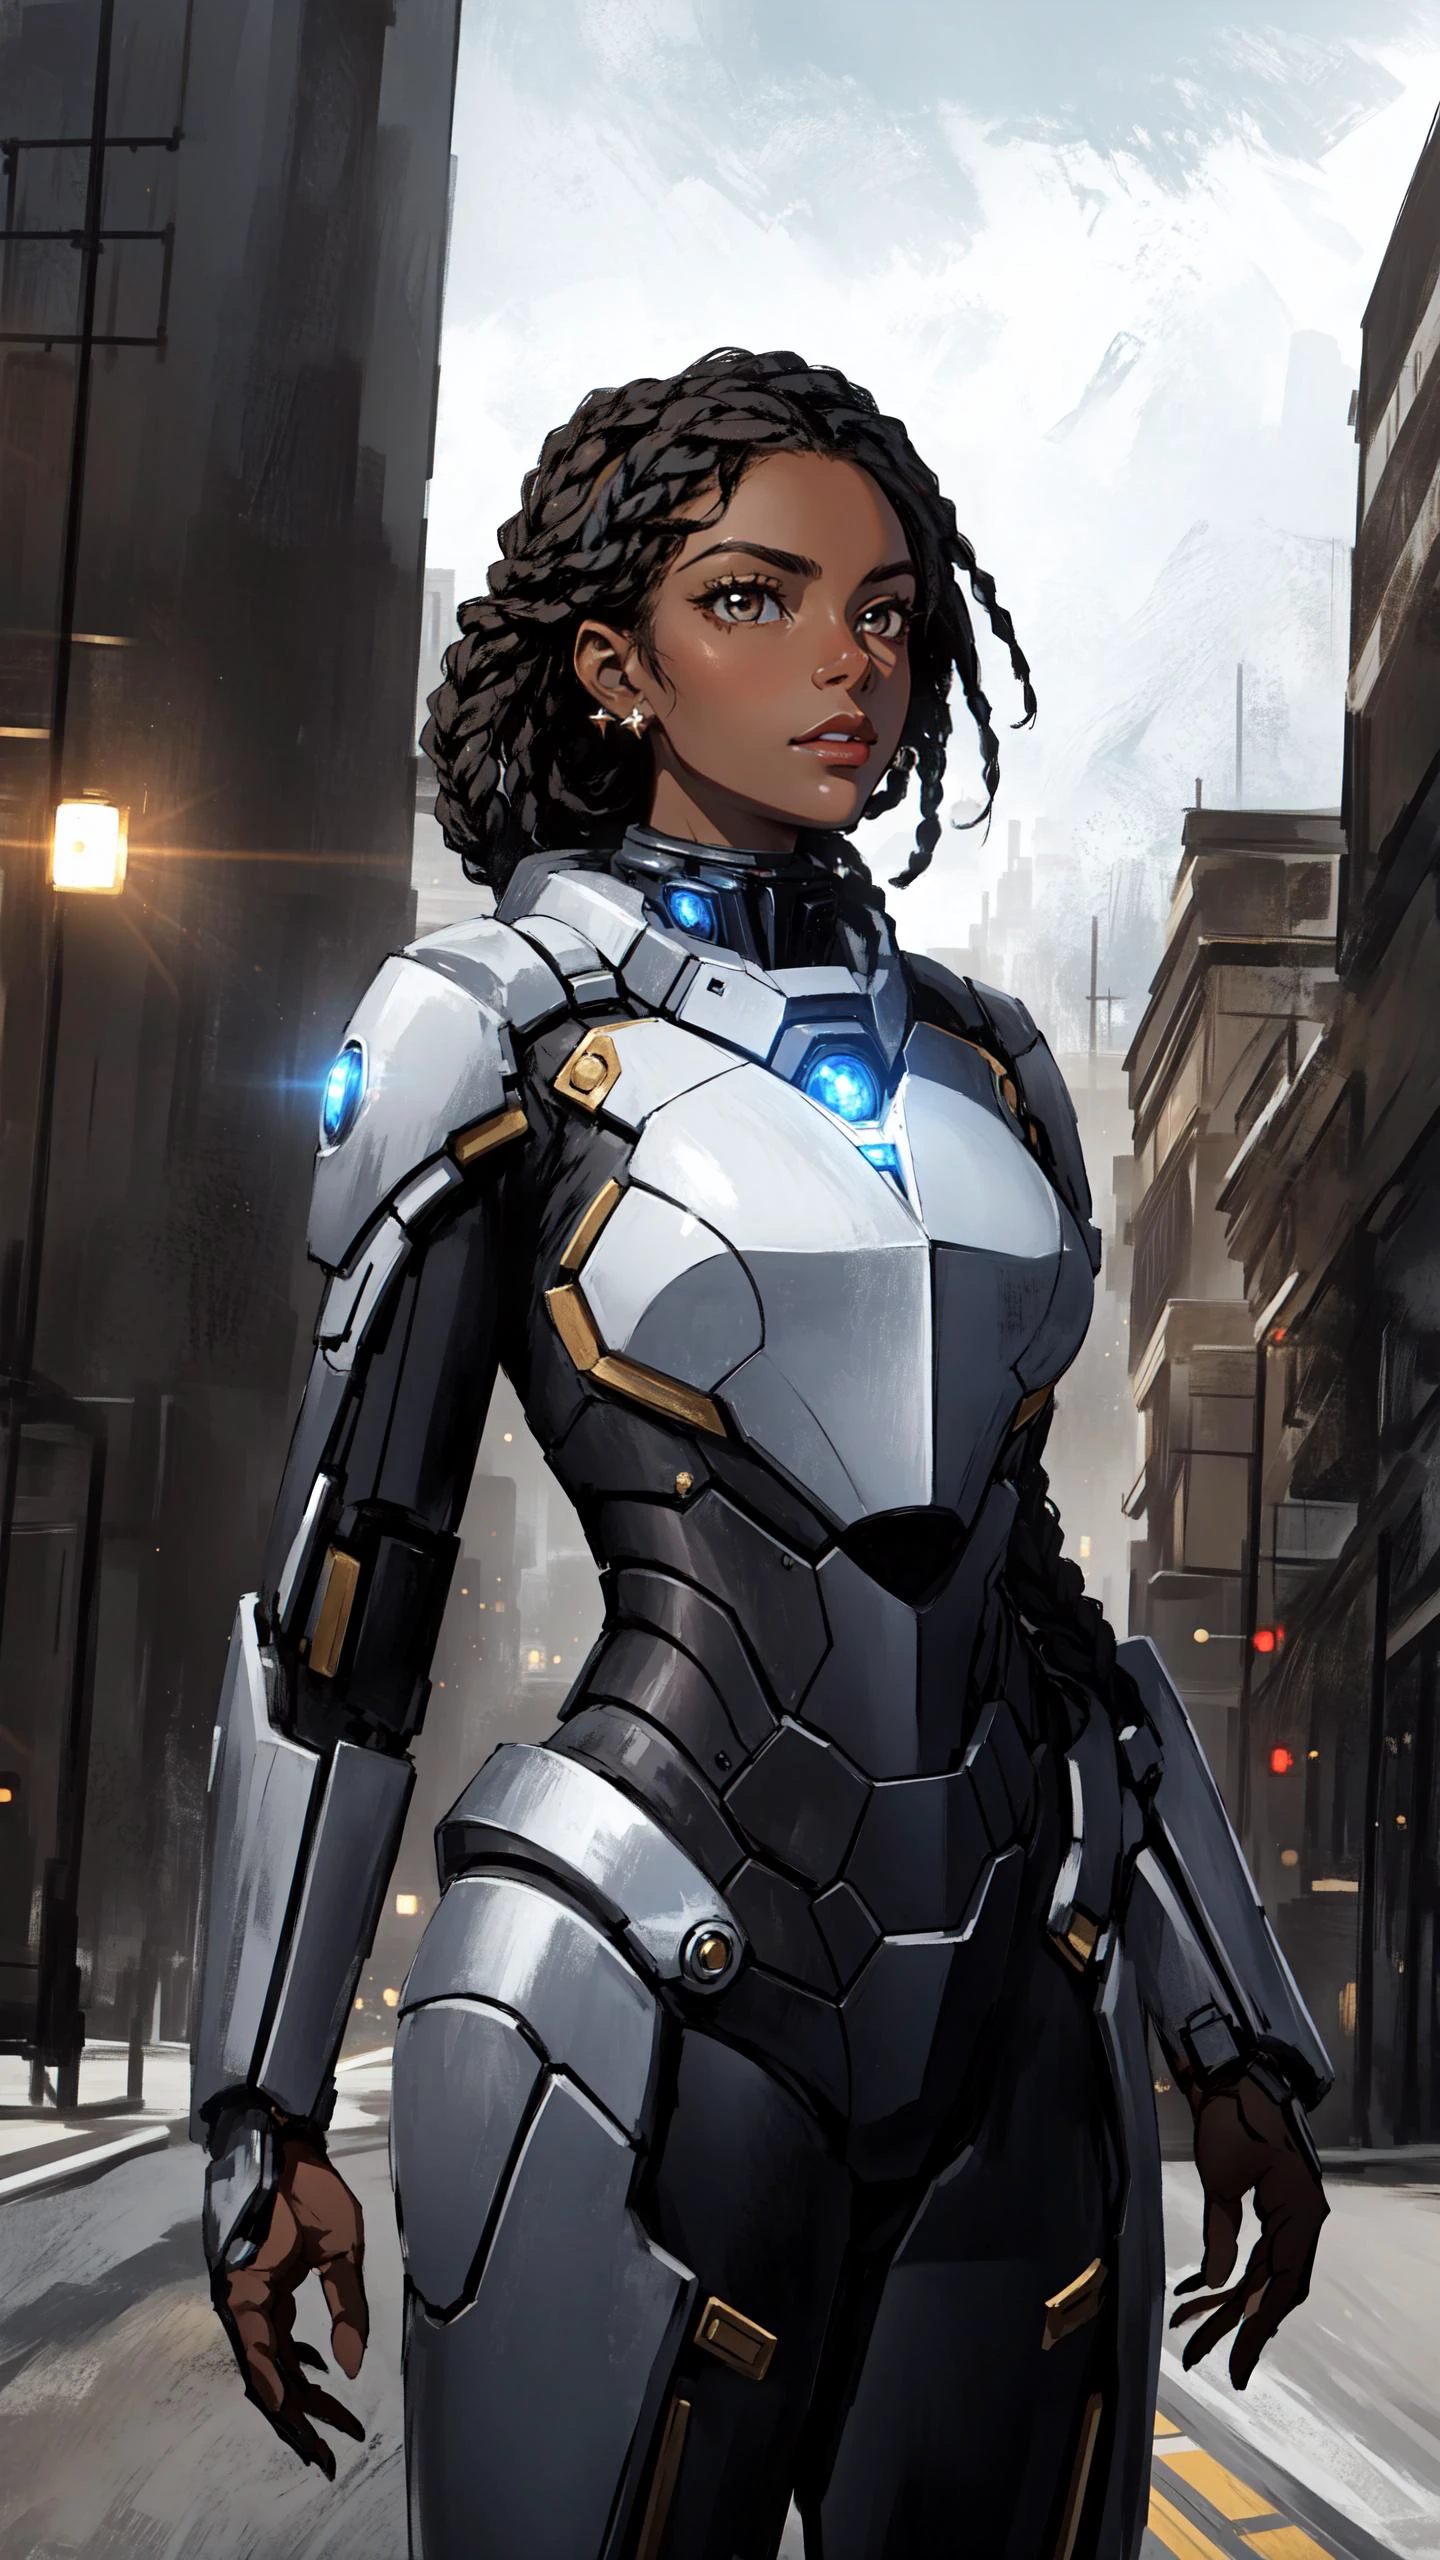 (Layered Depth, Parallax Effect, Soft focus foreground:1.3) (style of Annie Leibovitz), (intense dramatic lighting), ((darkskinned woman in scifi militarystyle uniform standing in front of mechatank)), sharp angles, embellished with intricate gold braiding and medals, commanding posture, (dystopian cityscape in the background), ominous clouds, deep shadows, sense of urgency and power,